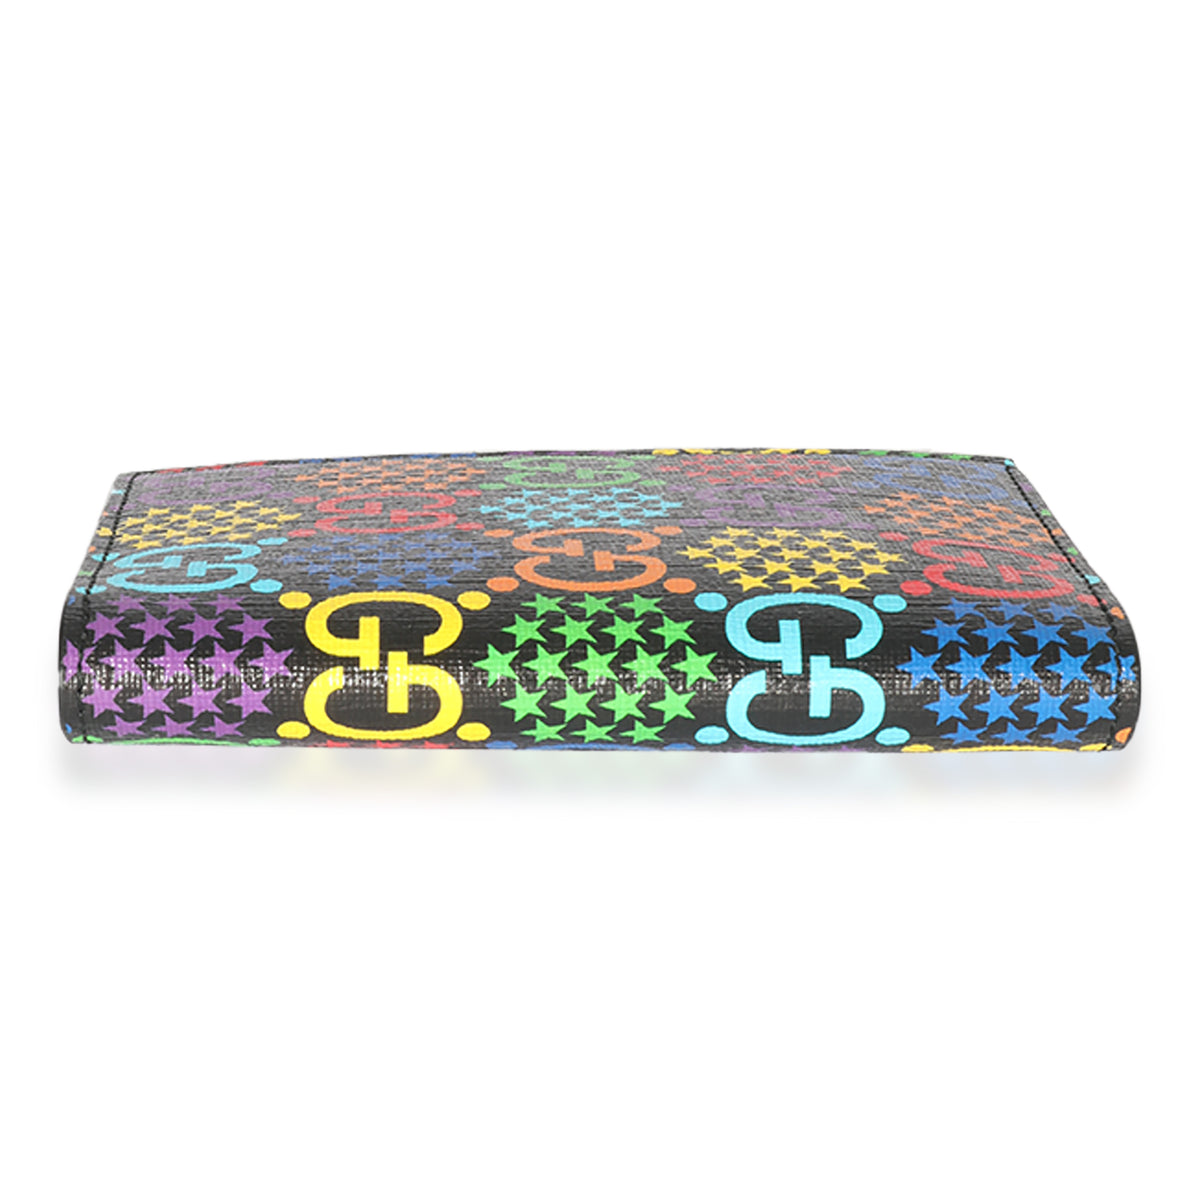 Gucci Limited Edition 'Psychedelic' Rainbow GG Supreme Canvas Passport Cover, myGemma